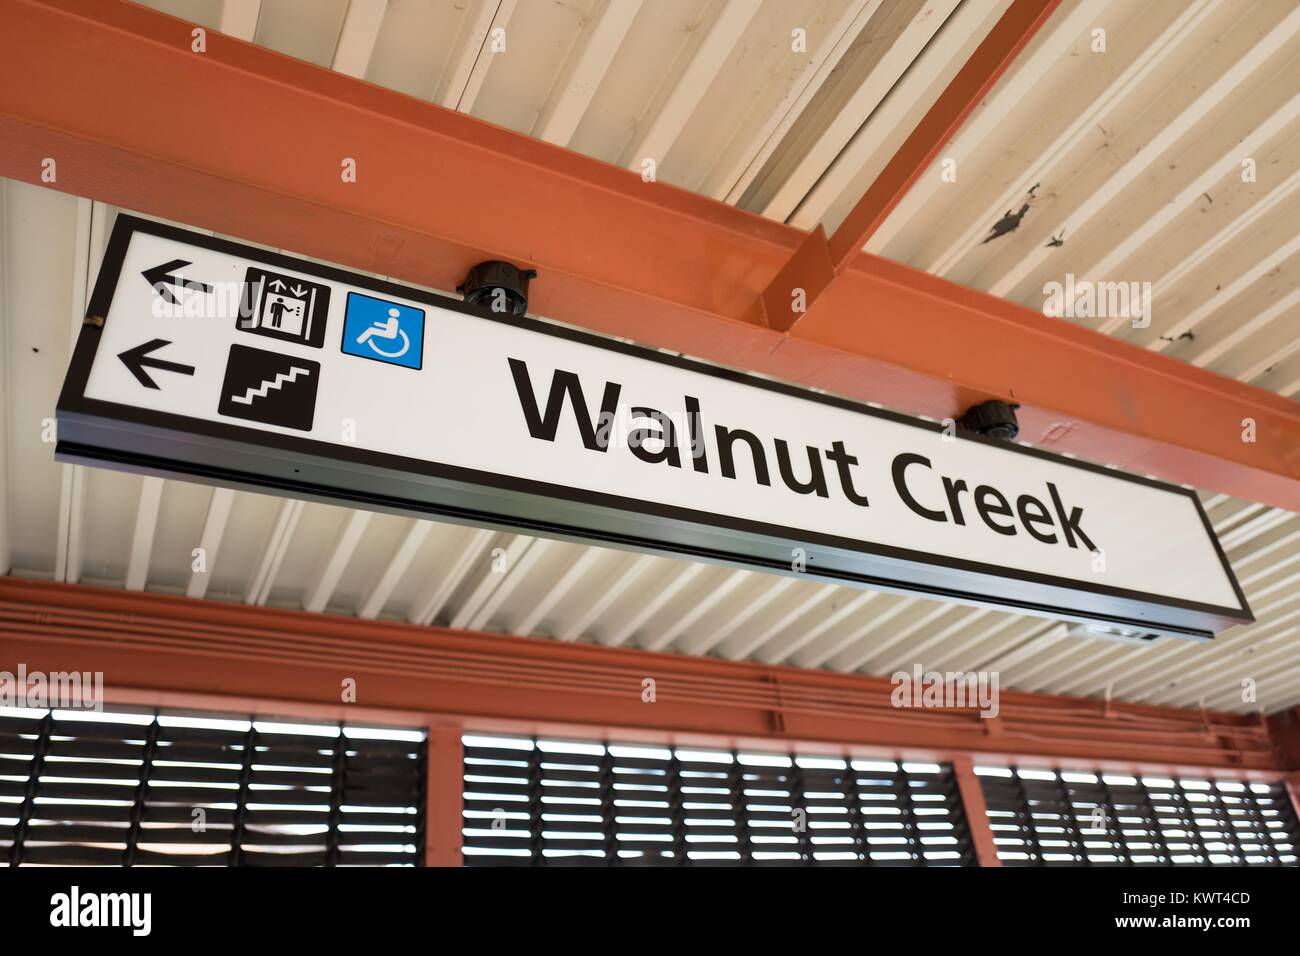 Signage for the Walnut Creek, California station of the Bay Area Rapid Transit (BART) light rail system, September 13, 2017. Stock Photo